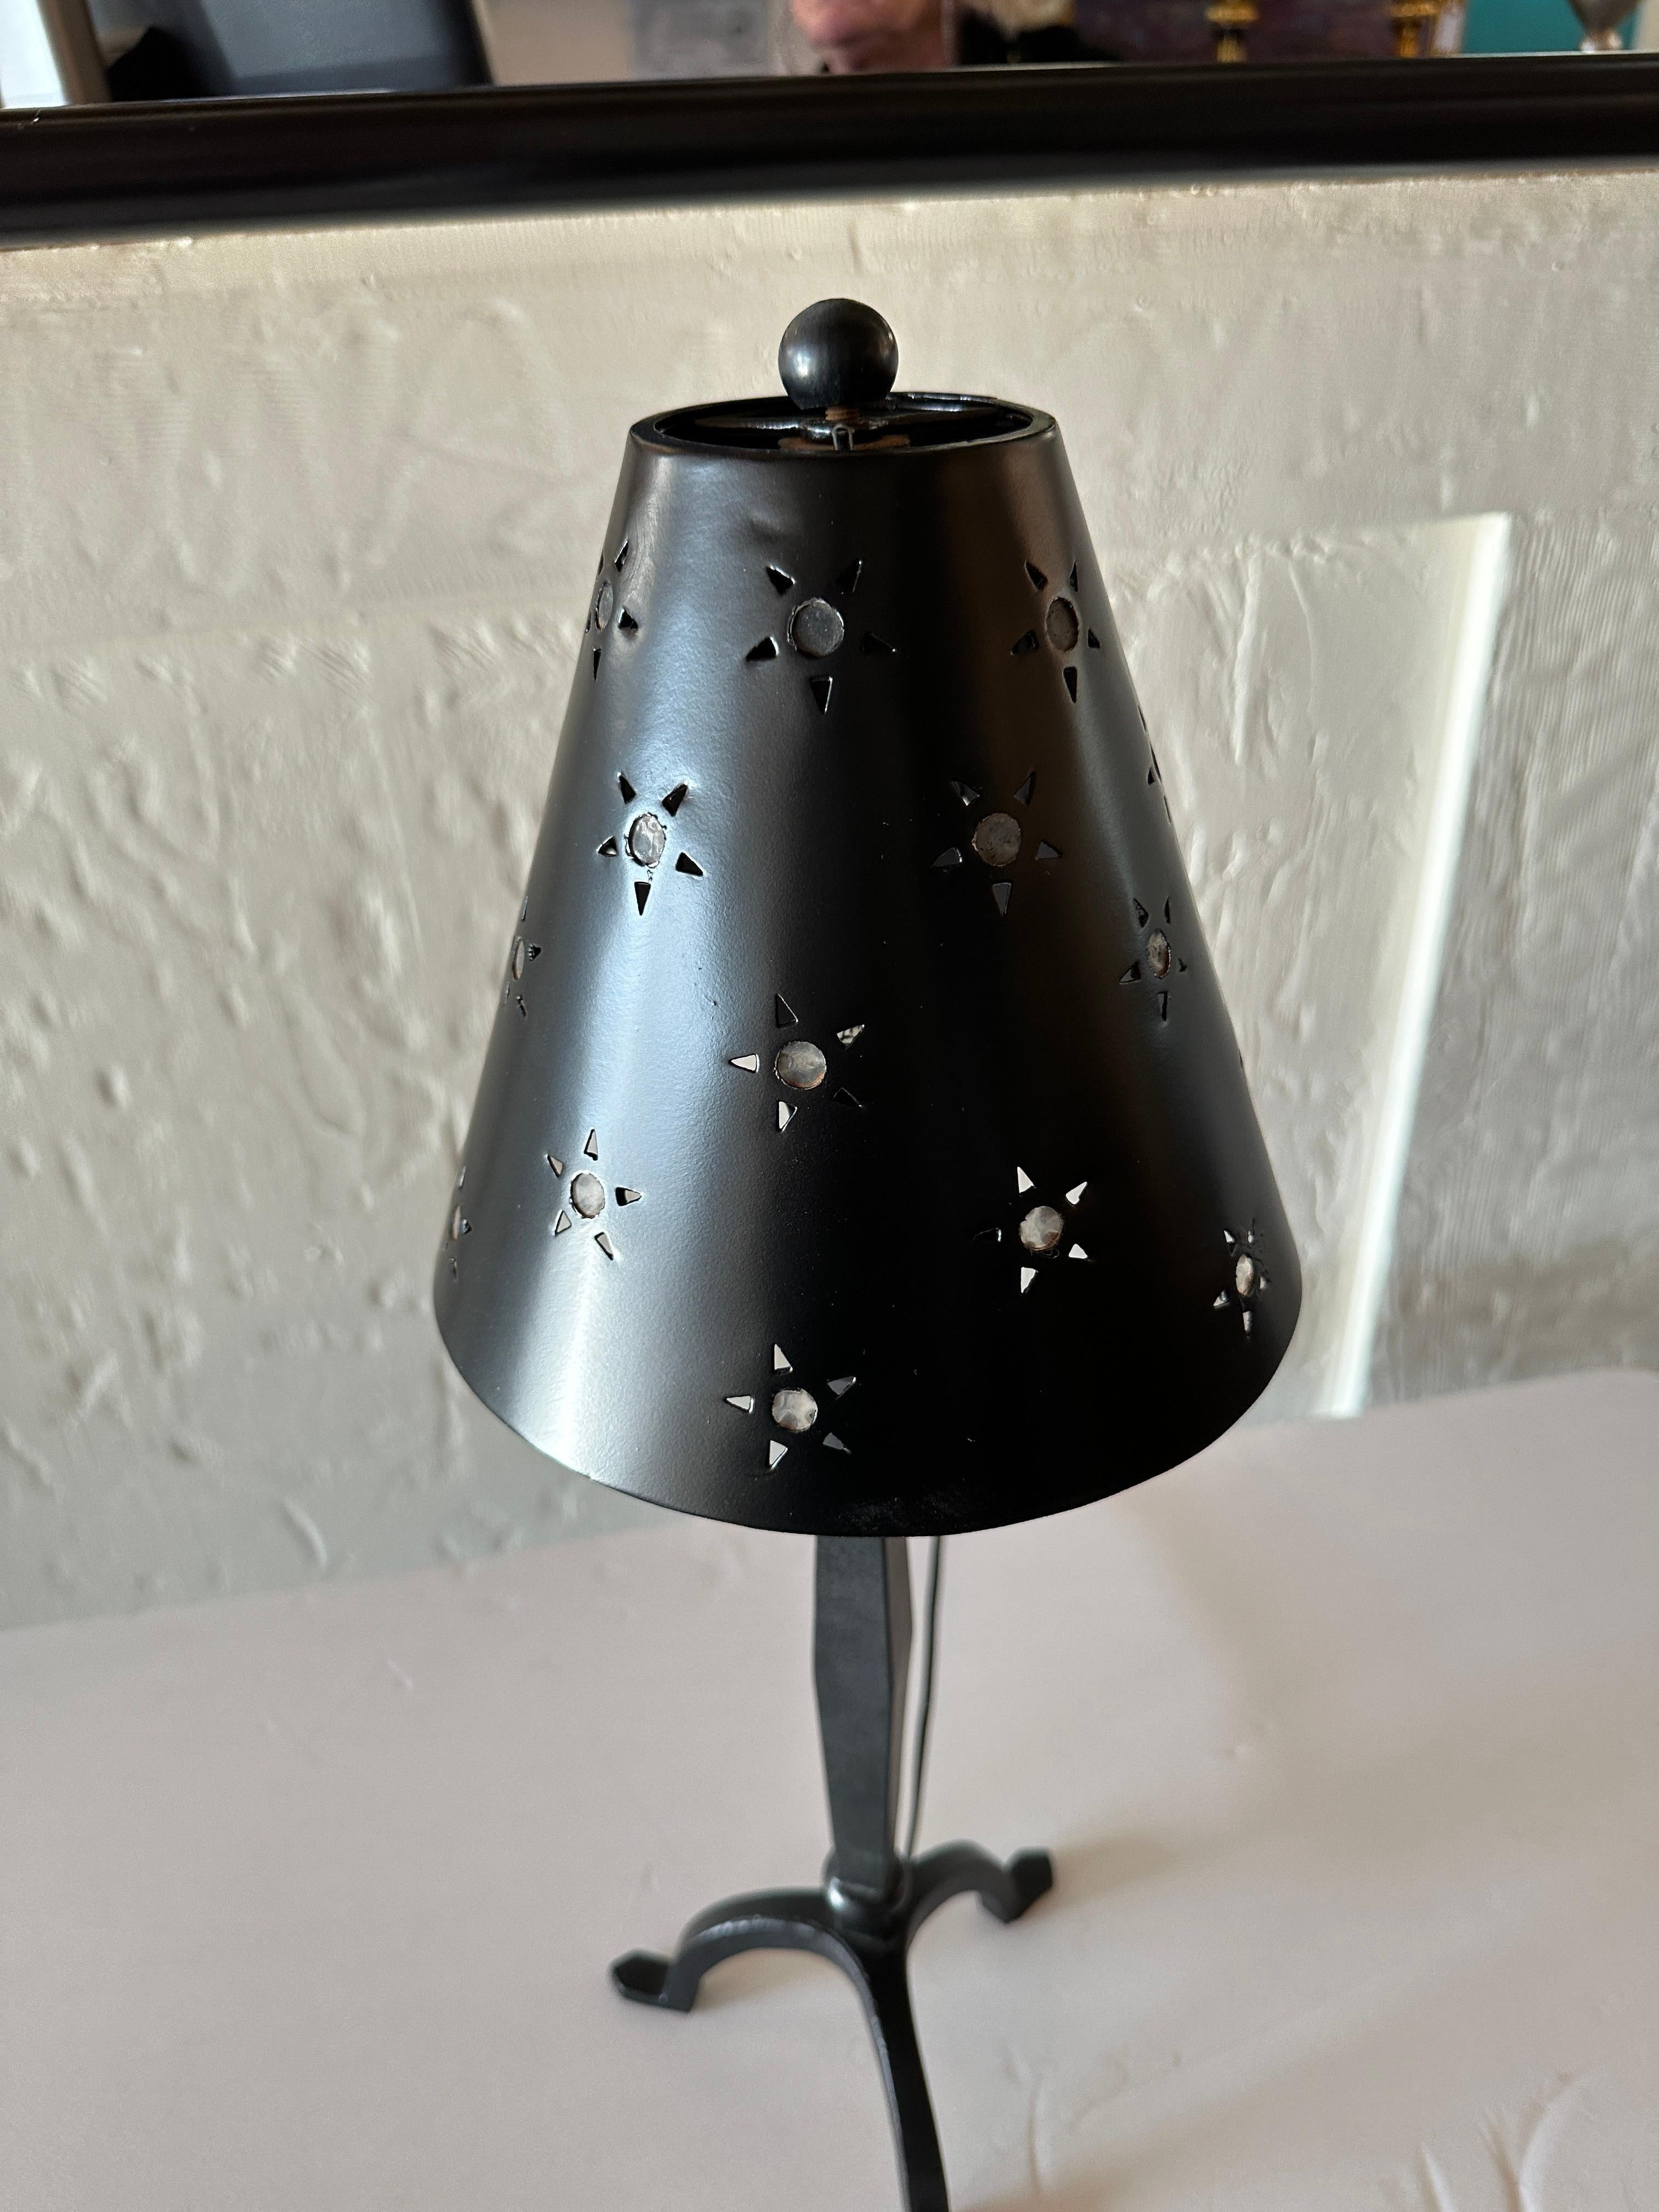 This mini table lamp has a sleek black base with three gracefully curved legs in the same flat black finish as the lamp's body and shade.
The shade features a unique pattern, with hollow stars scattered across its surface. These stars, each